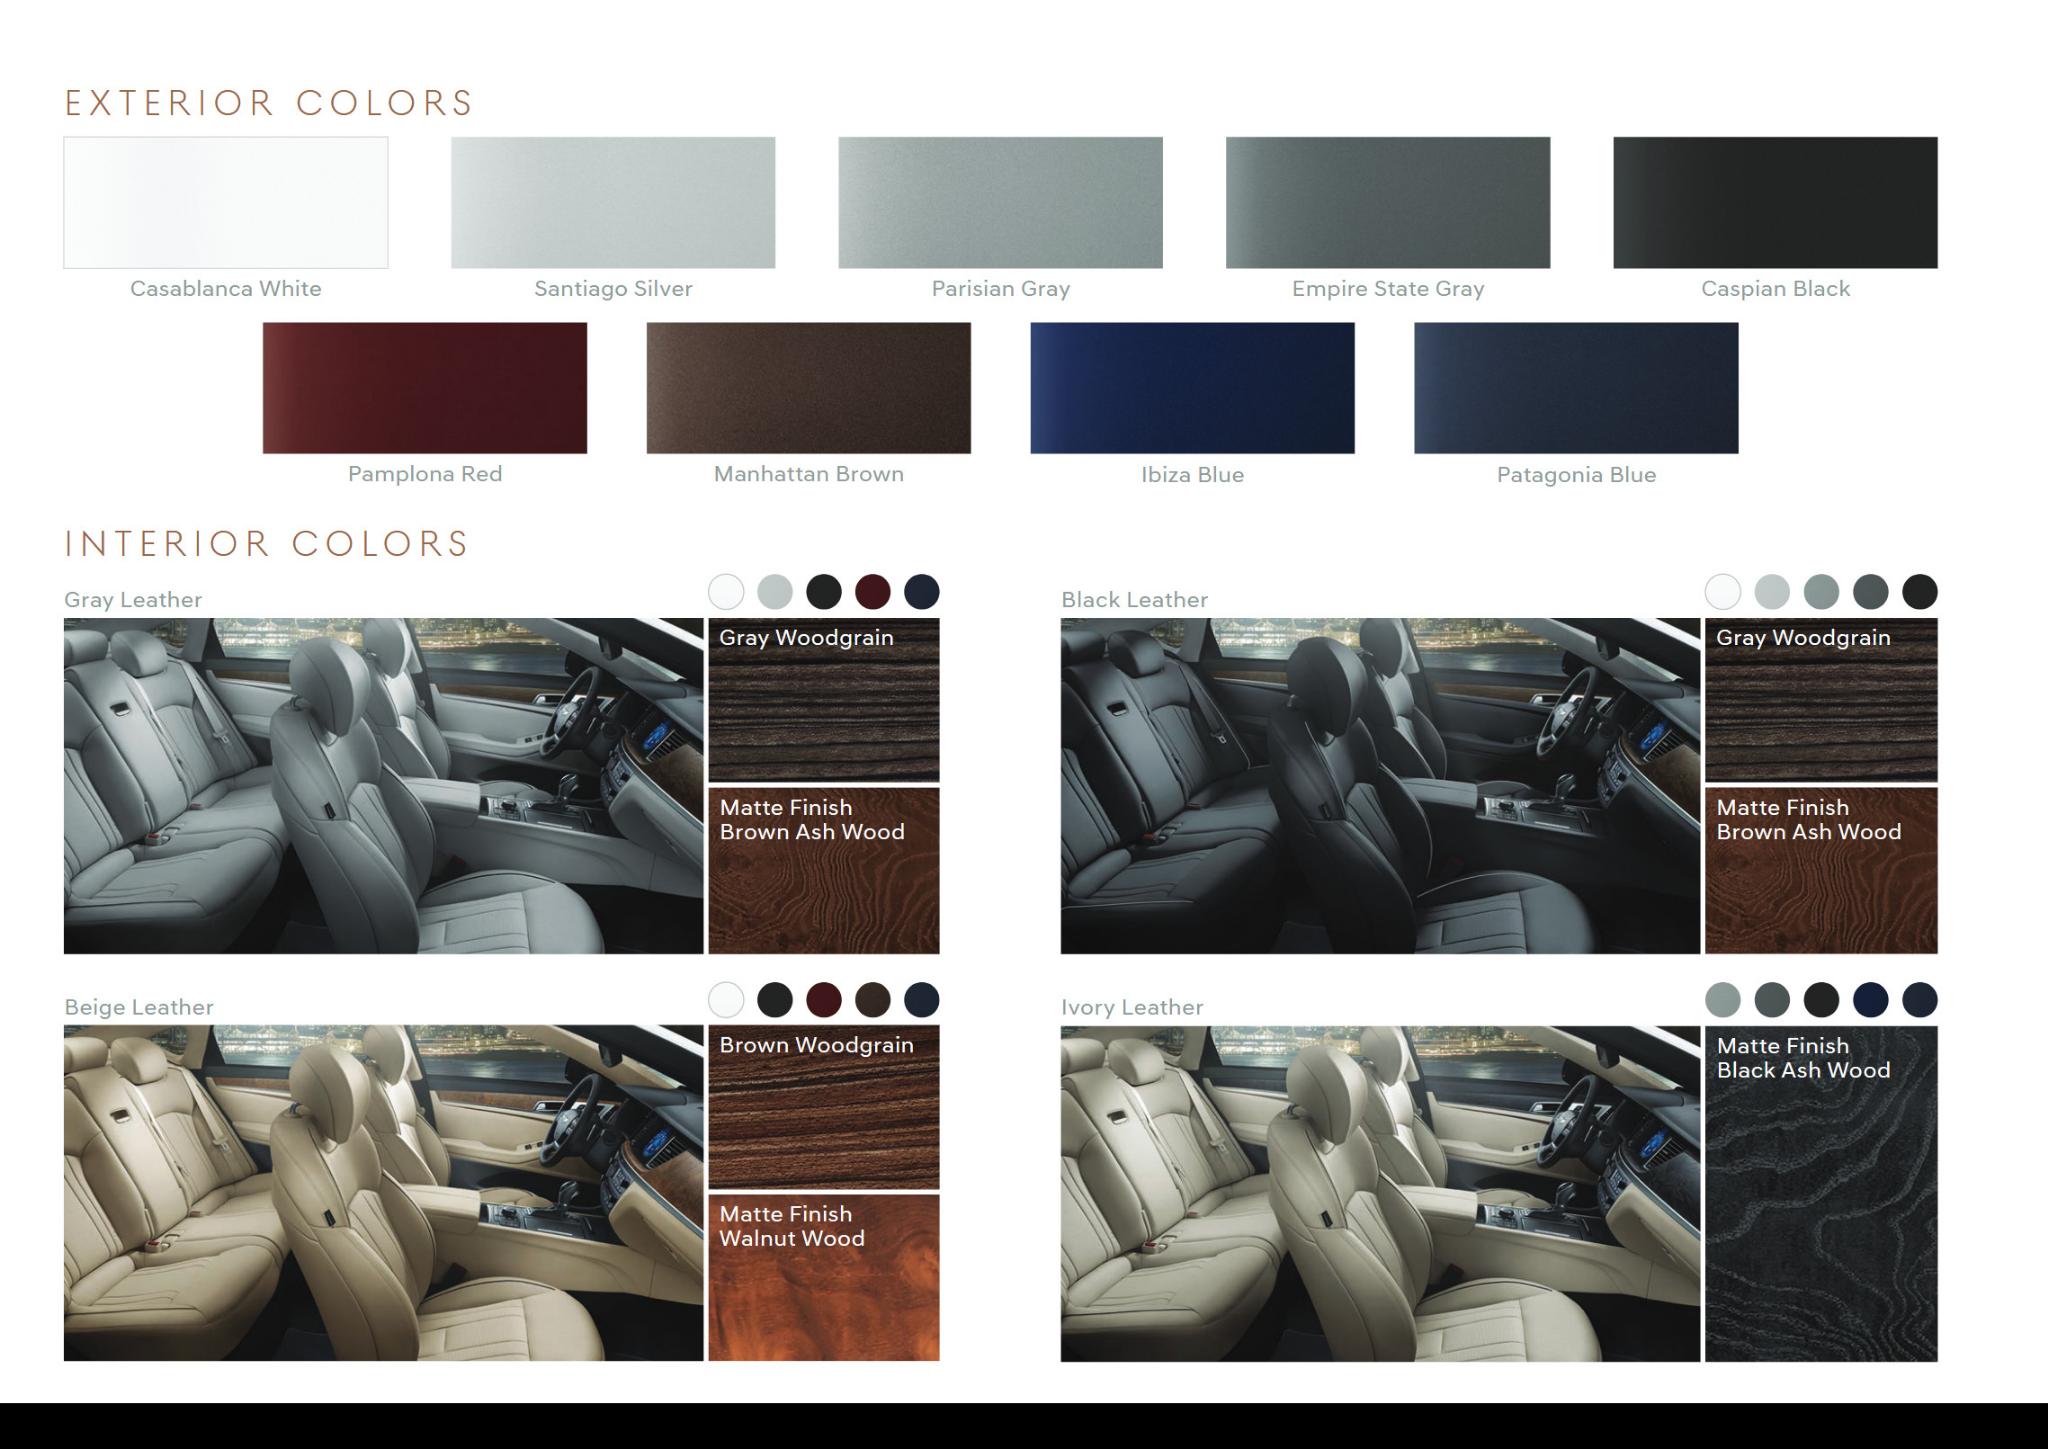 a picture showing the exterior colors and interior colors for a 2017 genesis g80 car